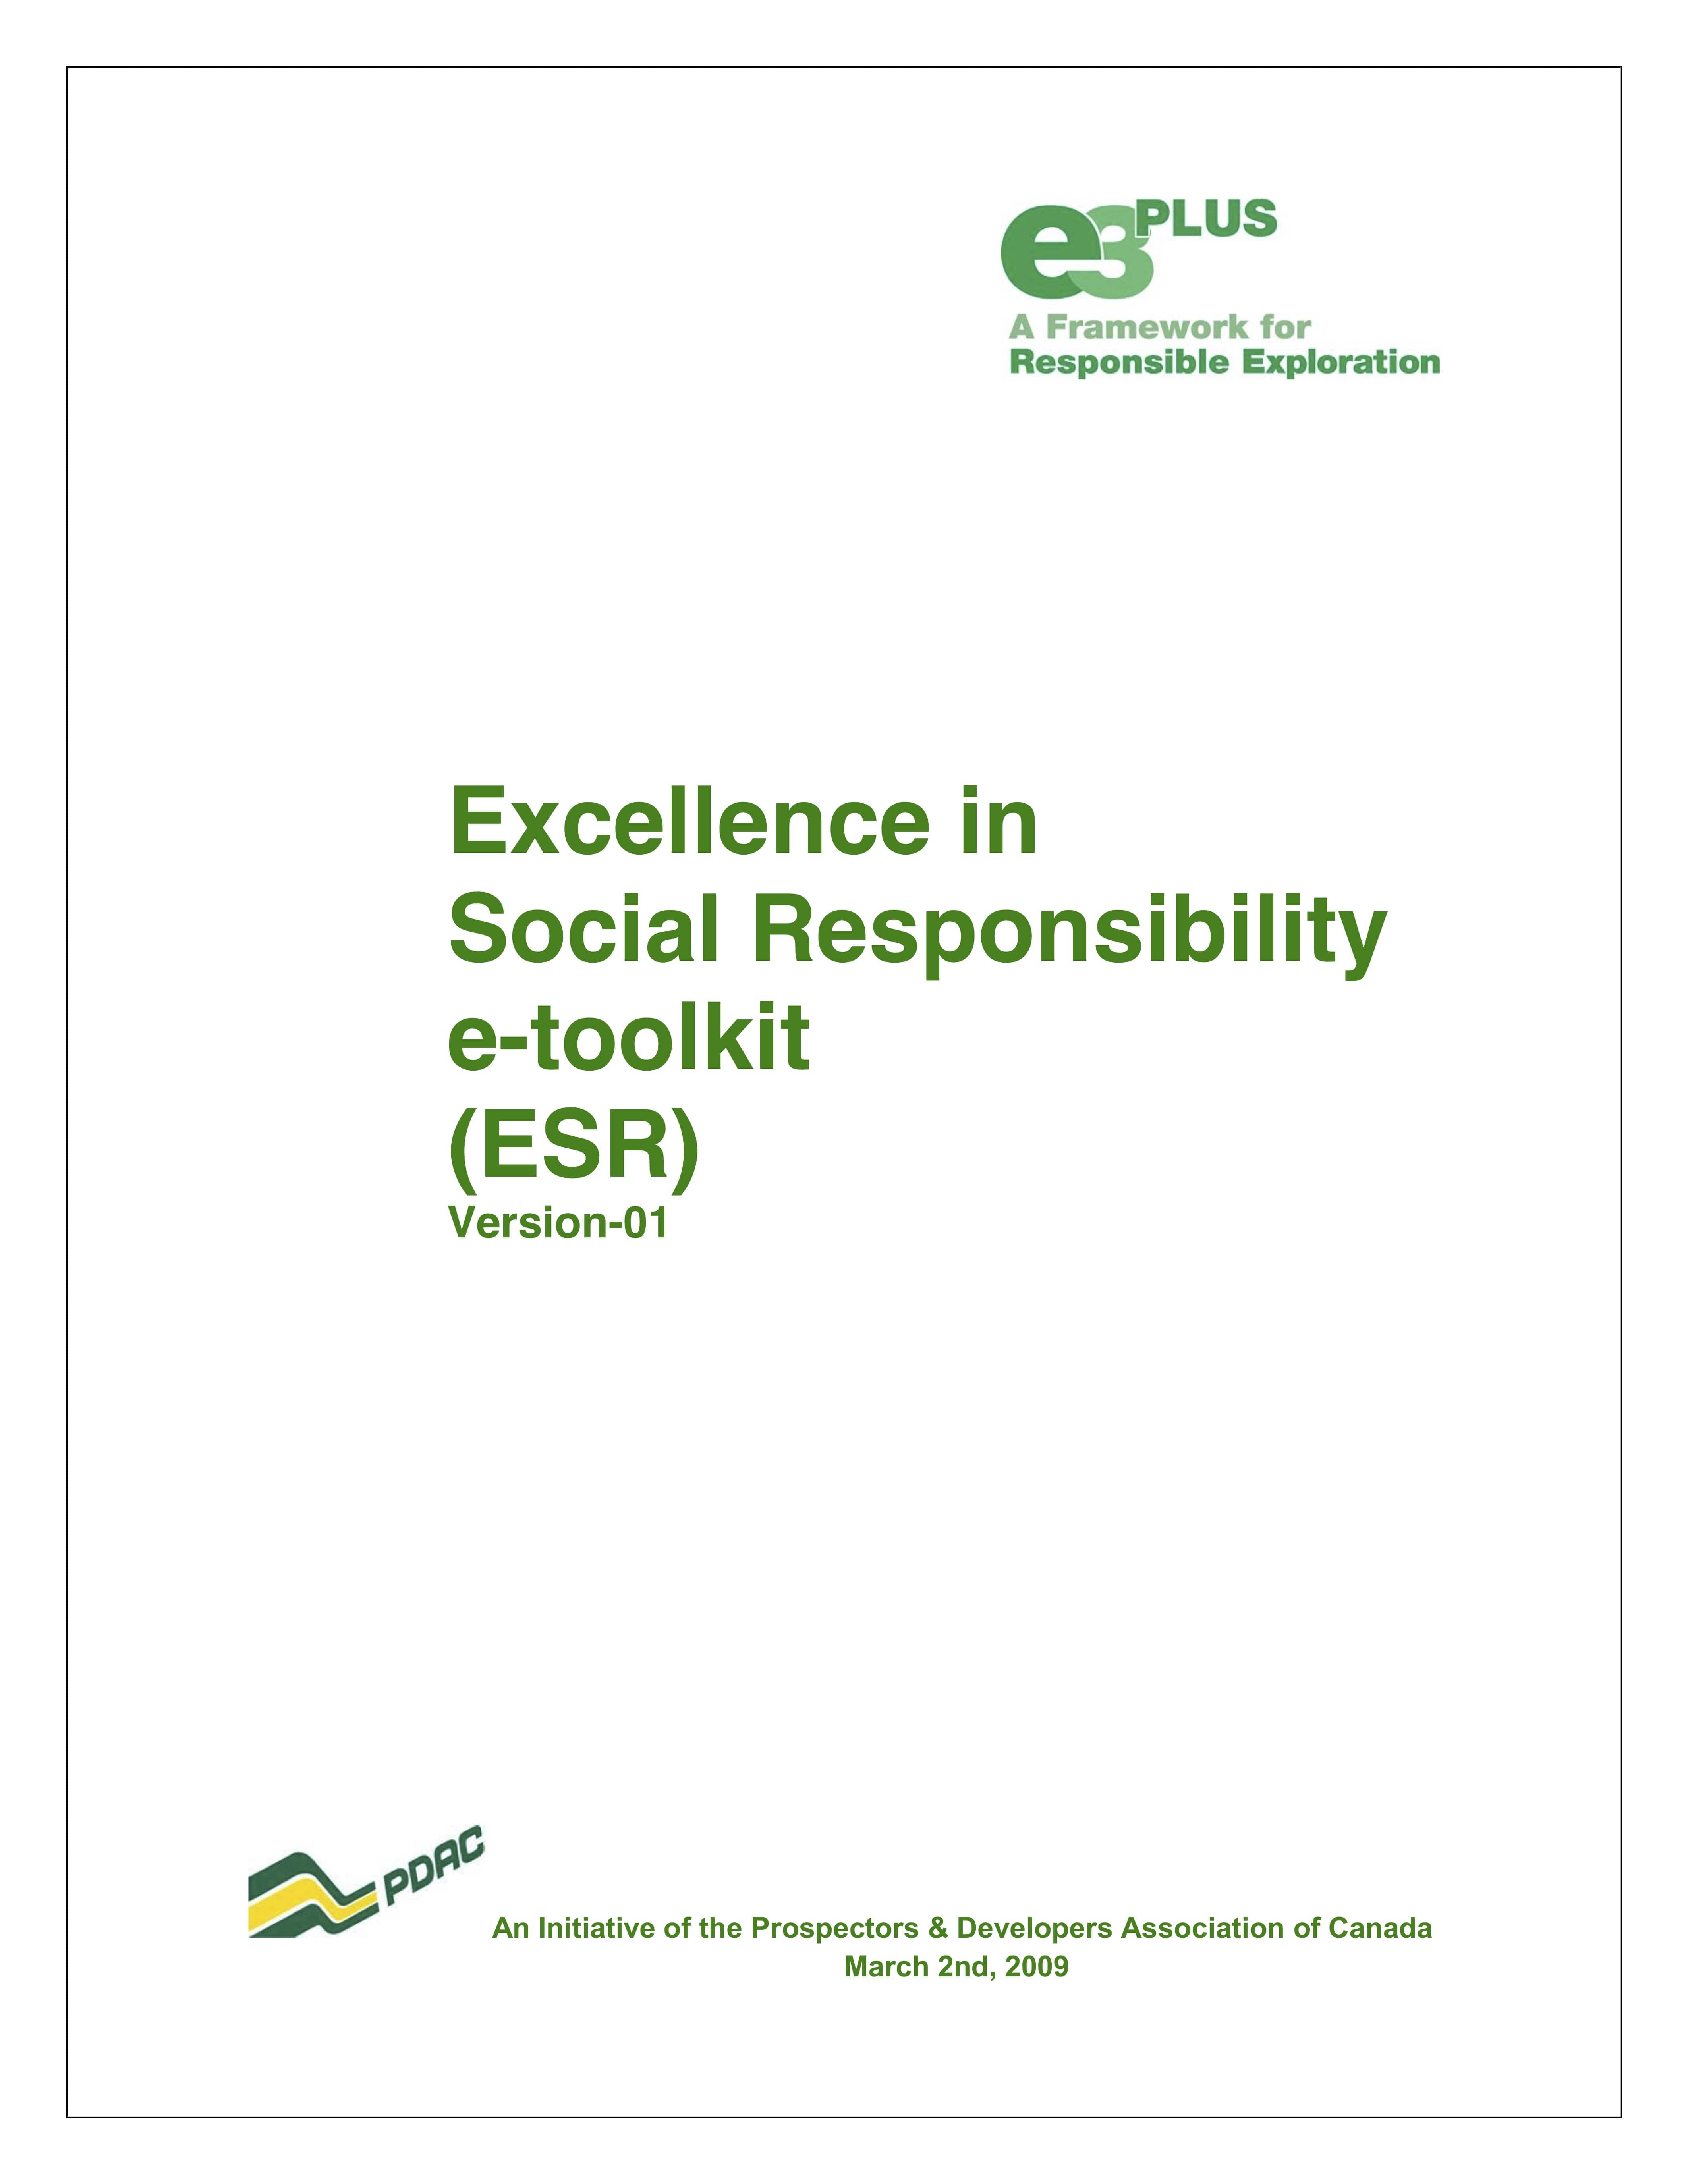 Excellence in Social Responsibility e-toolkit (ESR) (PDAC, 2009)